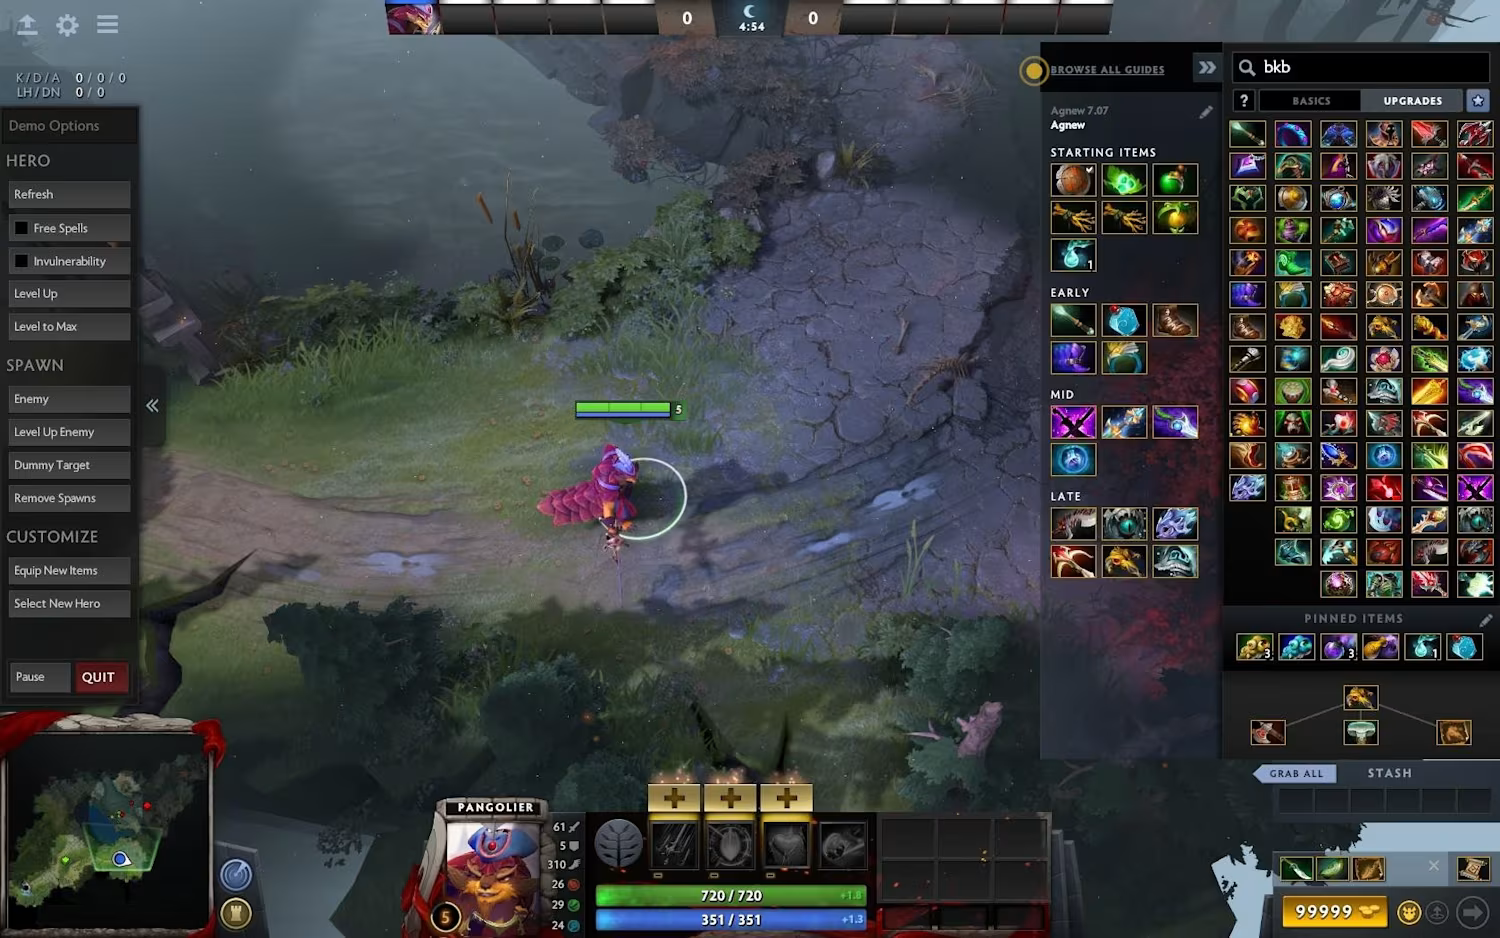 The item shop of Dota 2 is more complex, with over 100 unique items and a harder-to-navigate interface.&nbsp;